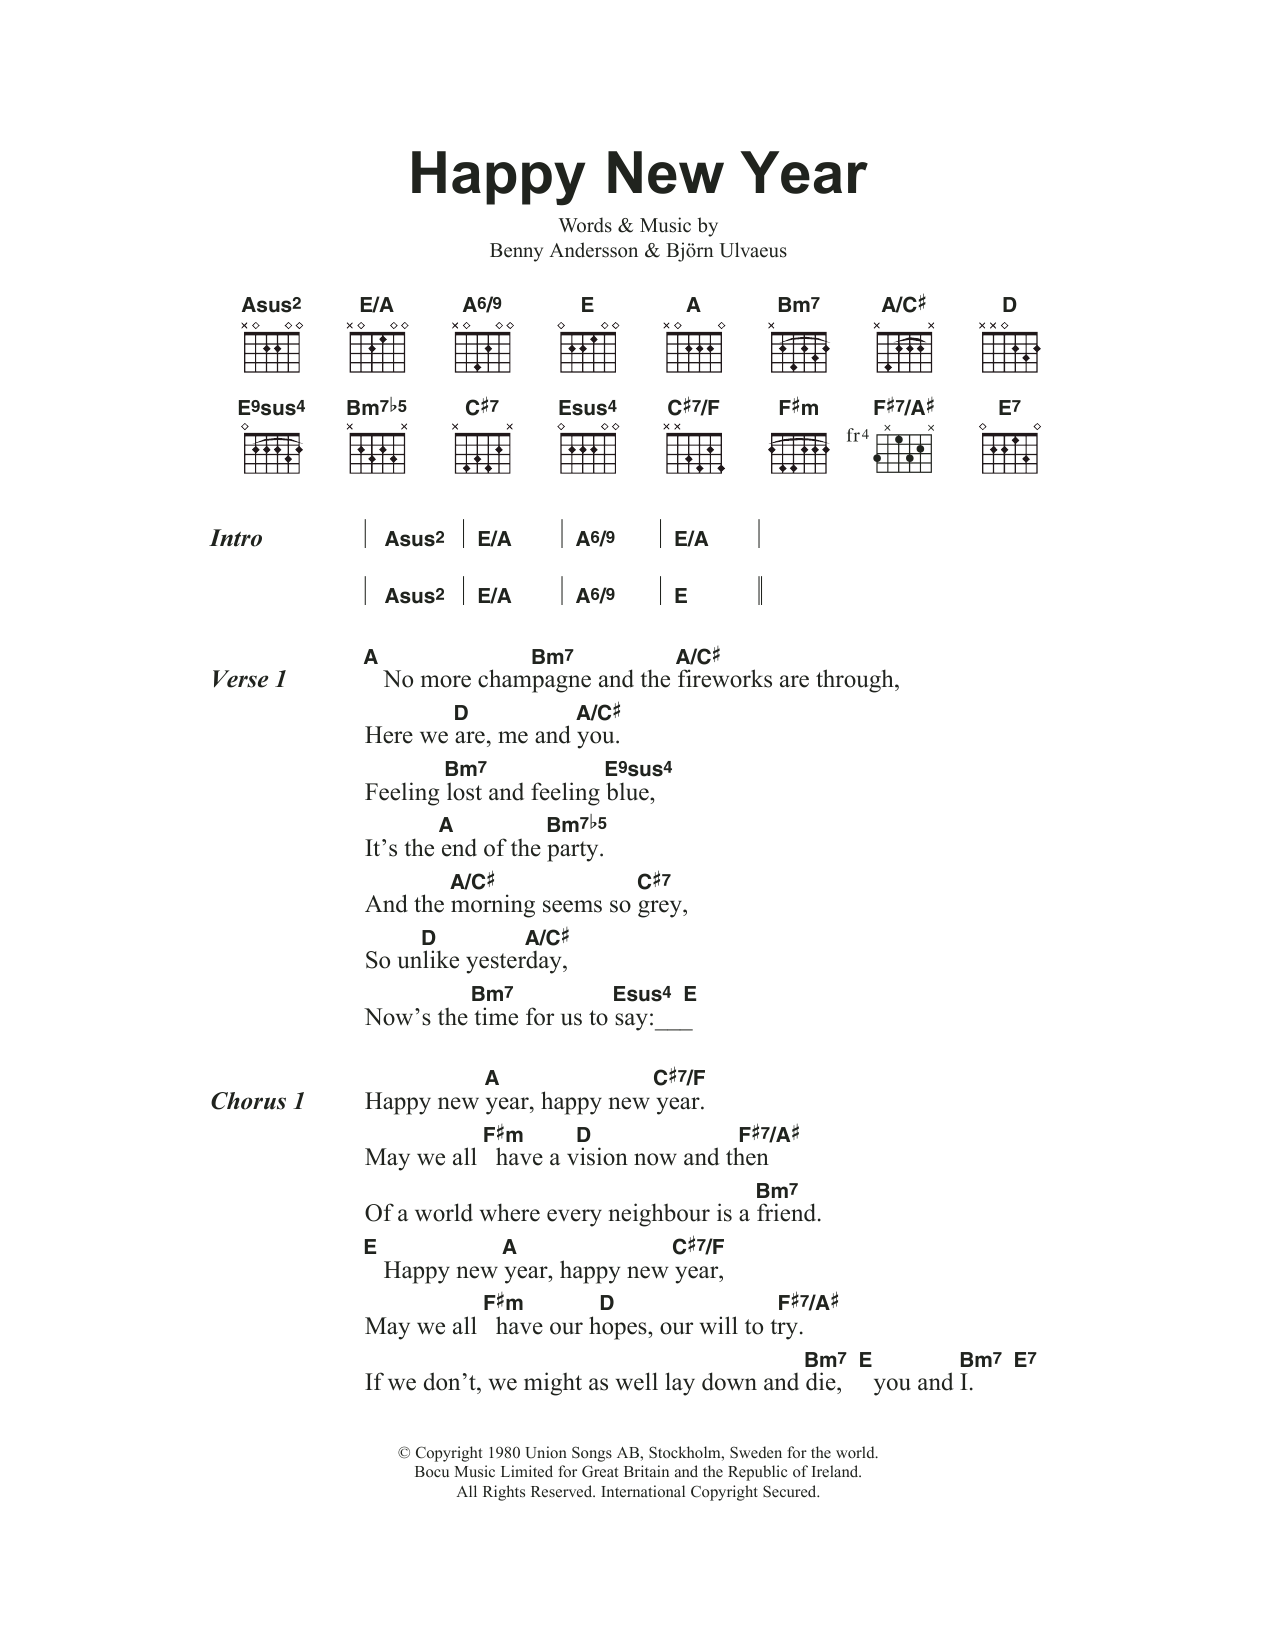 Download ABBA Happy New Year Sheet Music